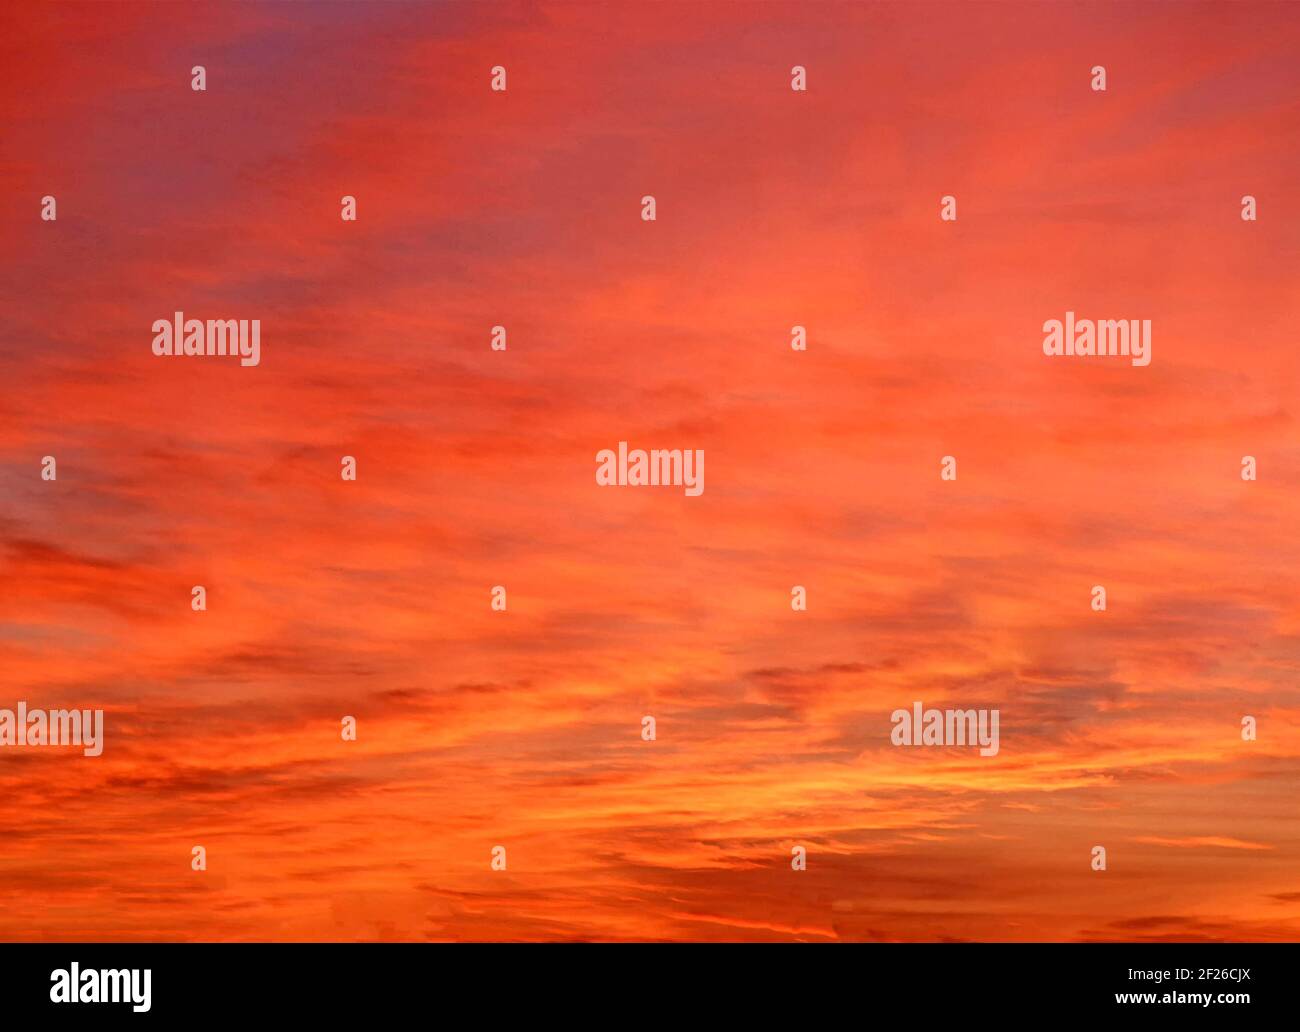 Film image for abstract background use of a 1980s vivid dramatic summer sunset sky glowing & reflecting on a cloud base varying between discernible horizontal banding layers with fiery orange red & yellow colours to overall soft smooth tints above county of Essex England in UK 80s archival historical archive image Stock Photo